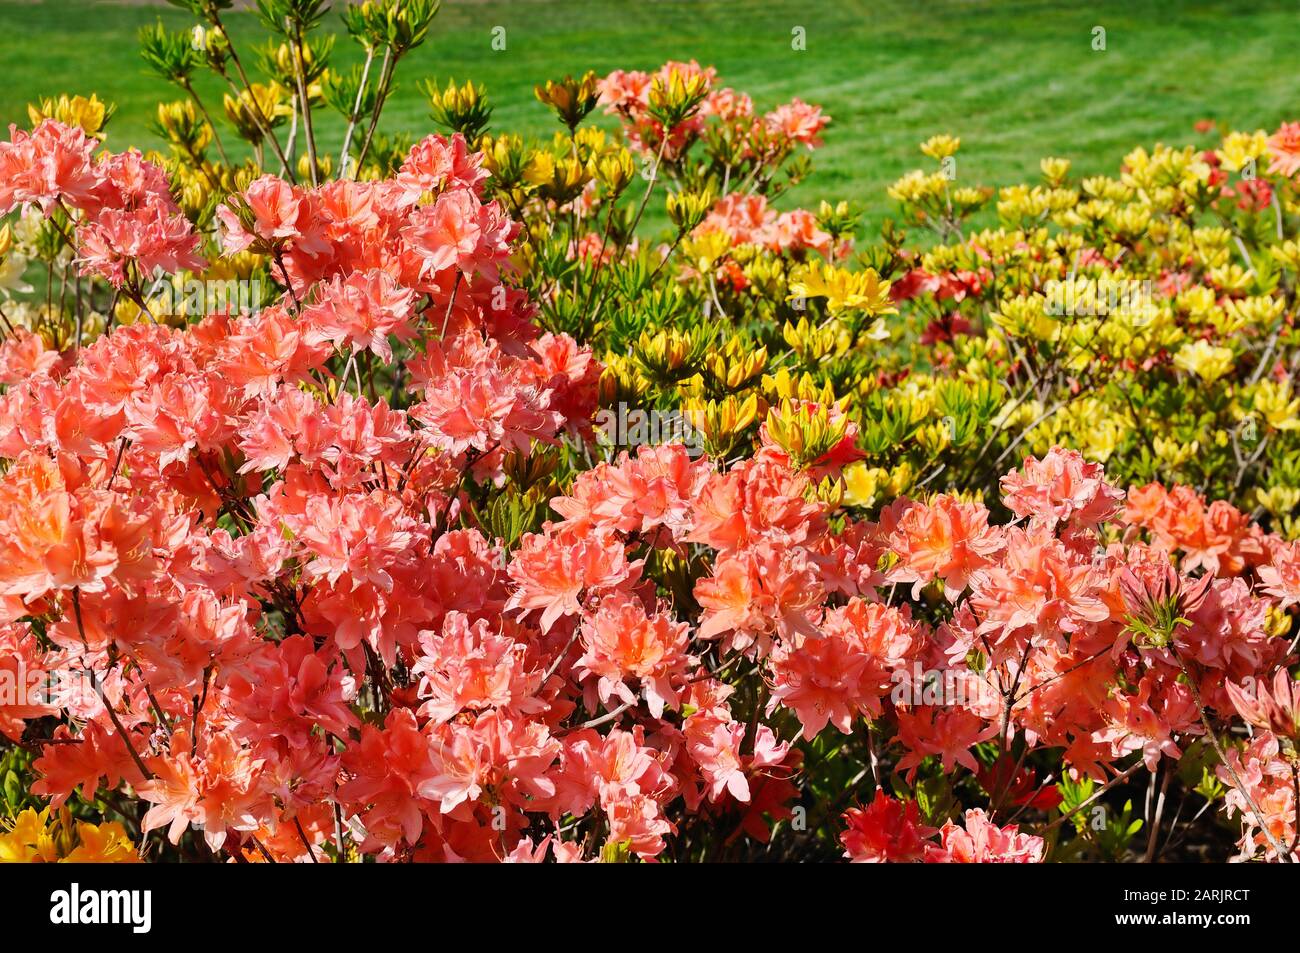 Bushes blooming rhododendron against the green lawn Stock Photo